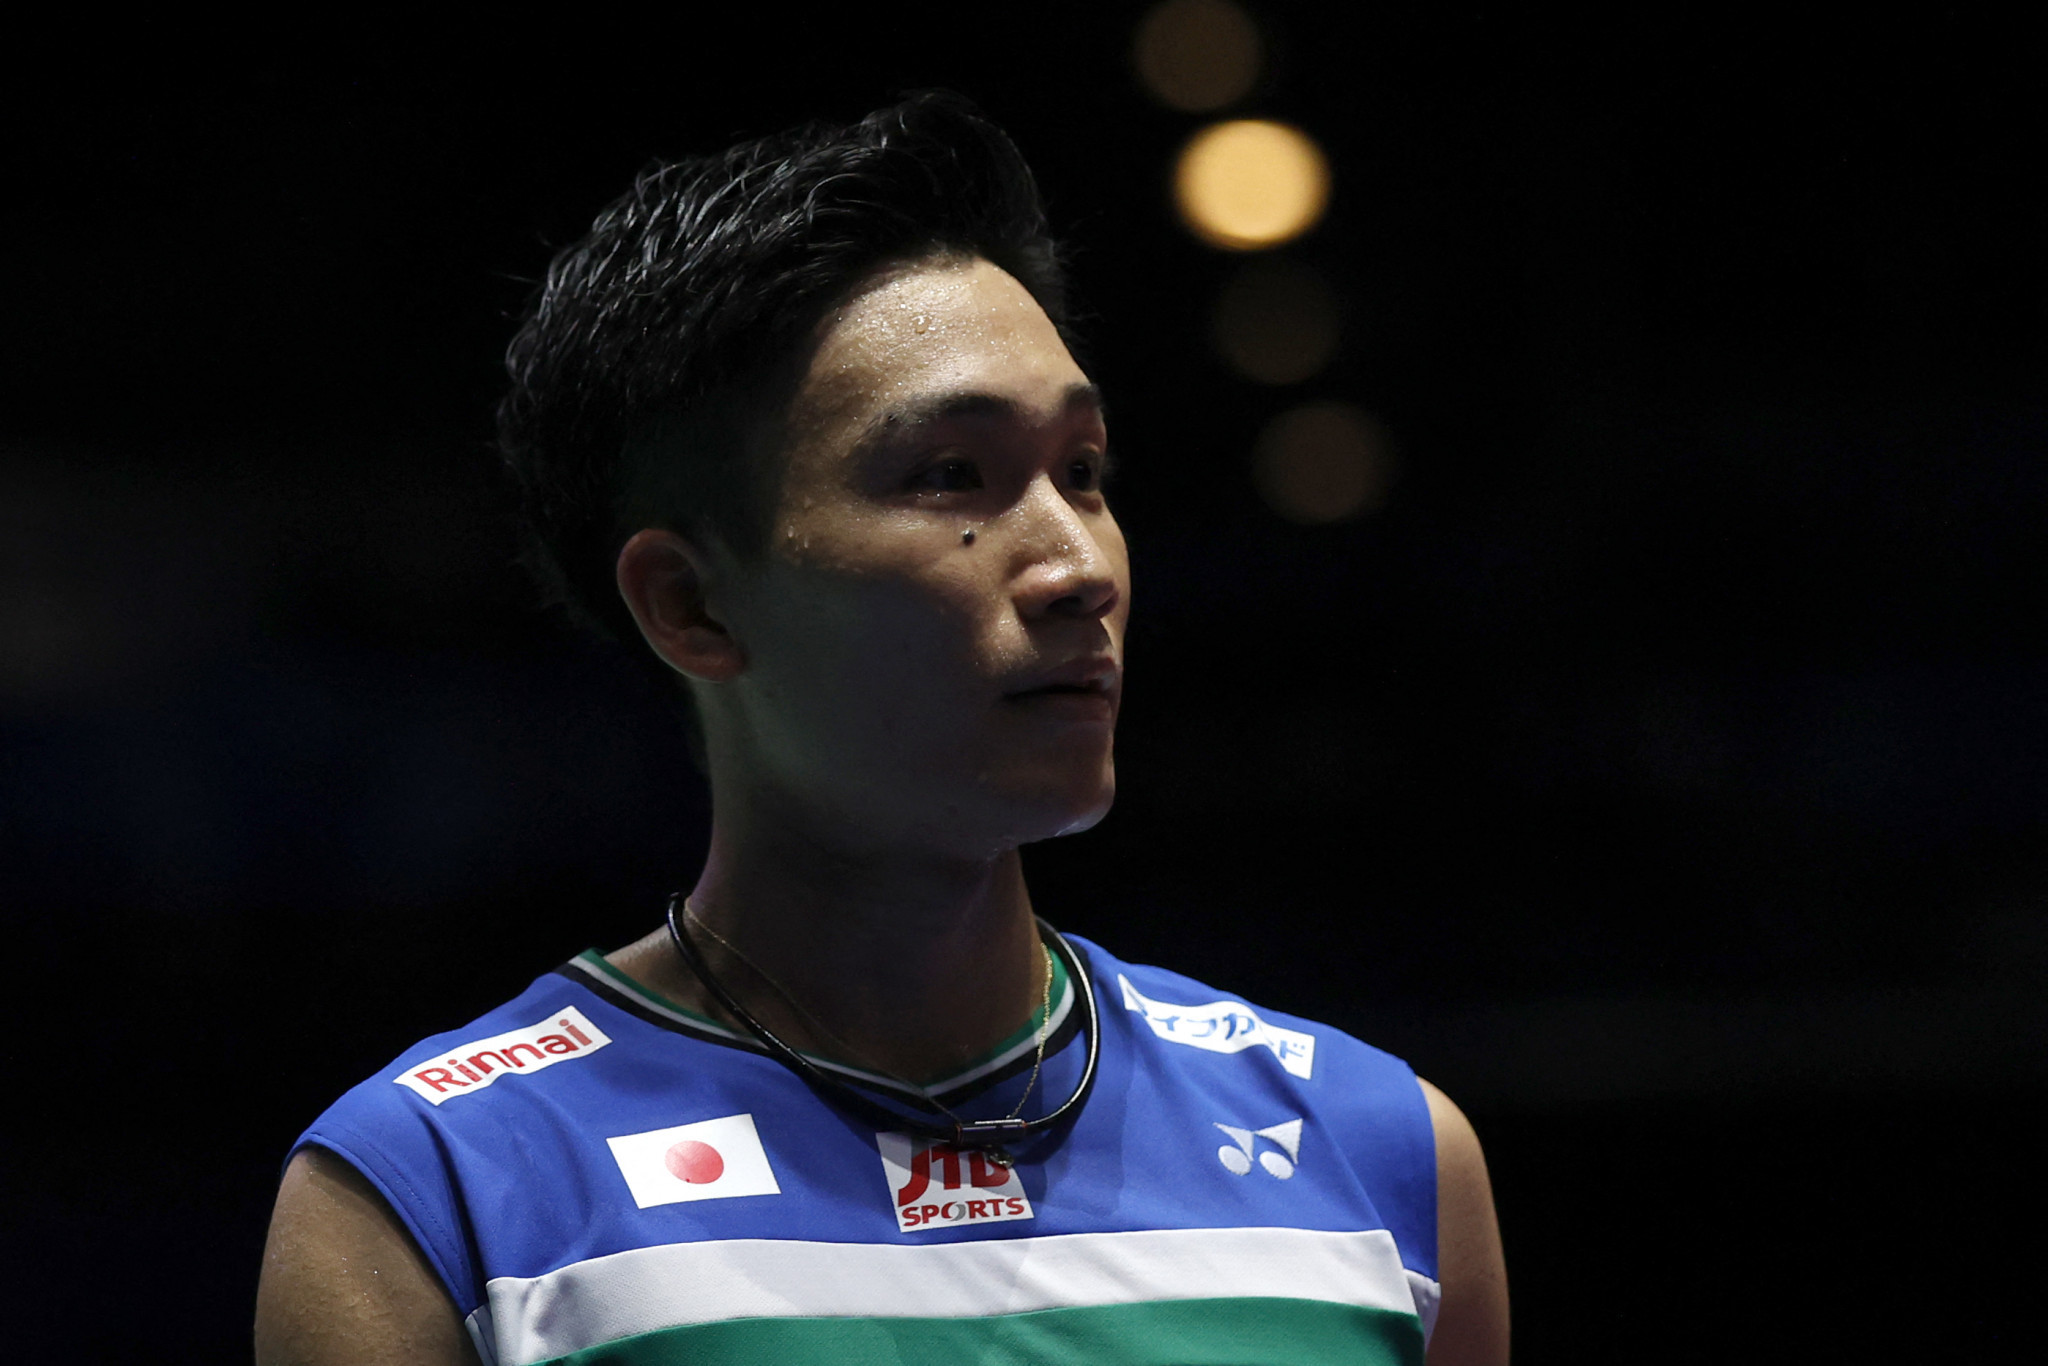 Momota knocked out on day three of All England Open Badminton Championships